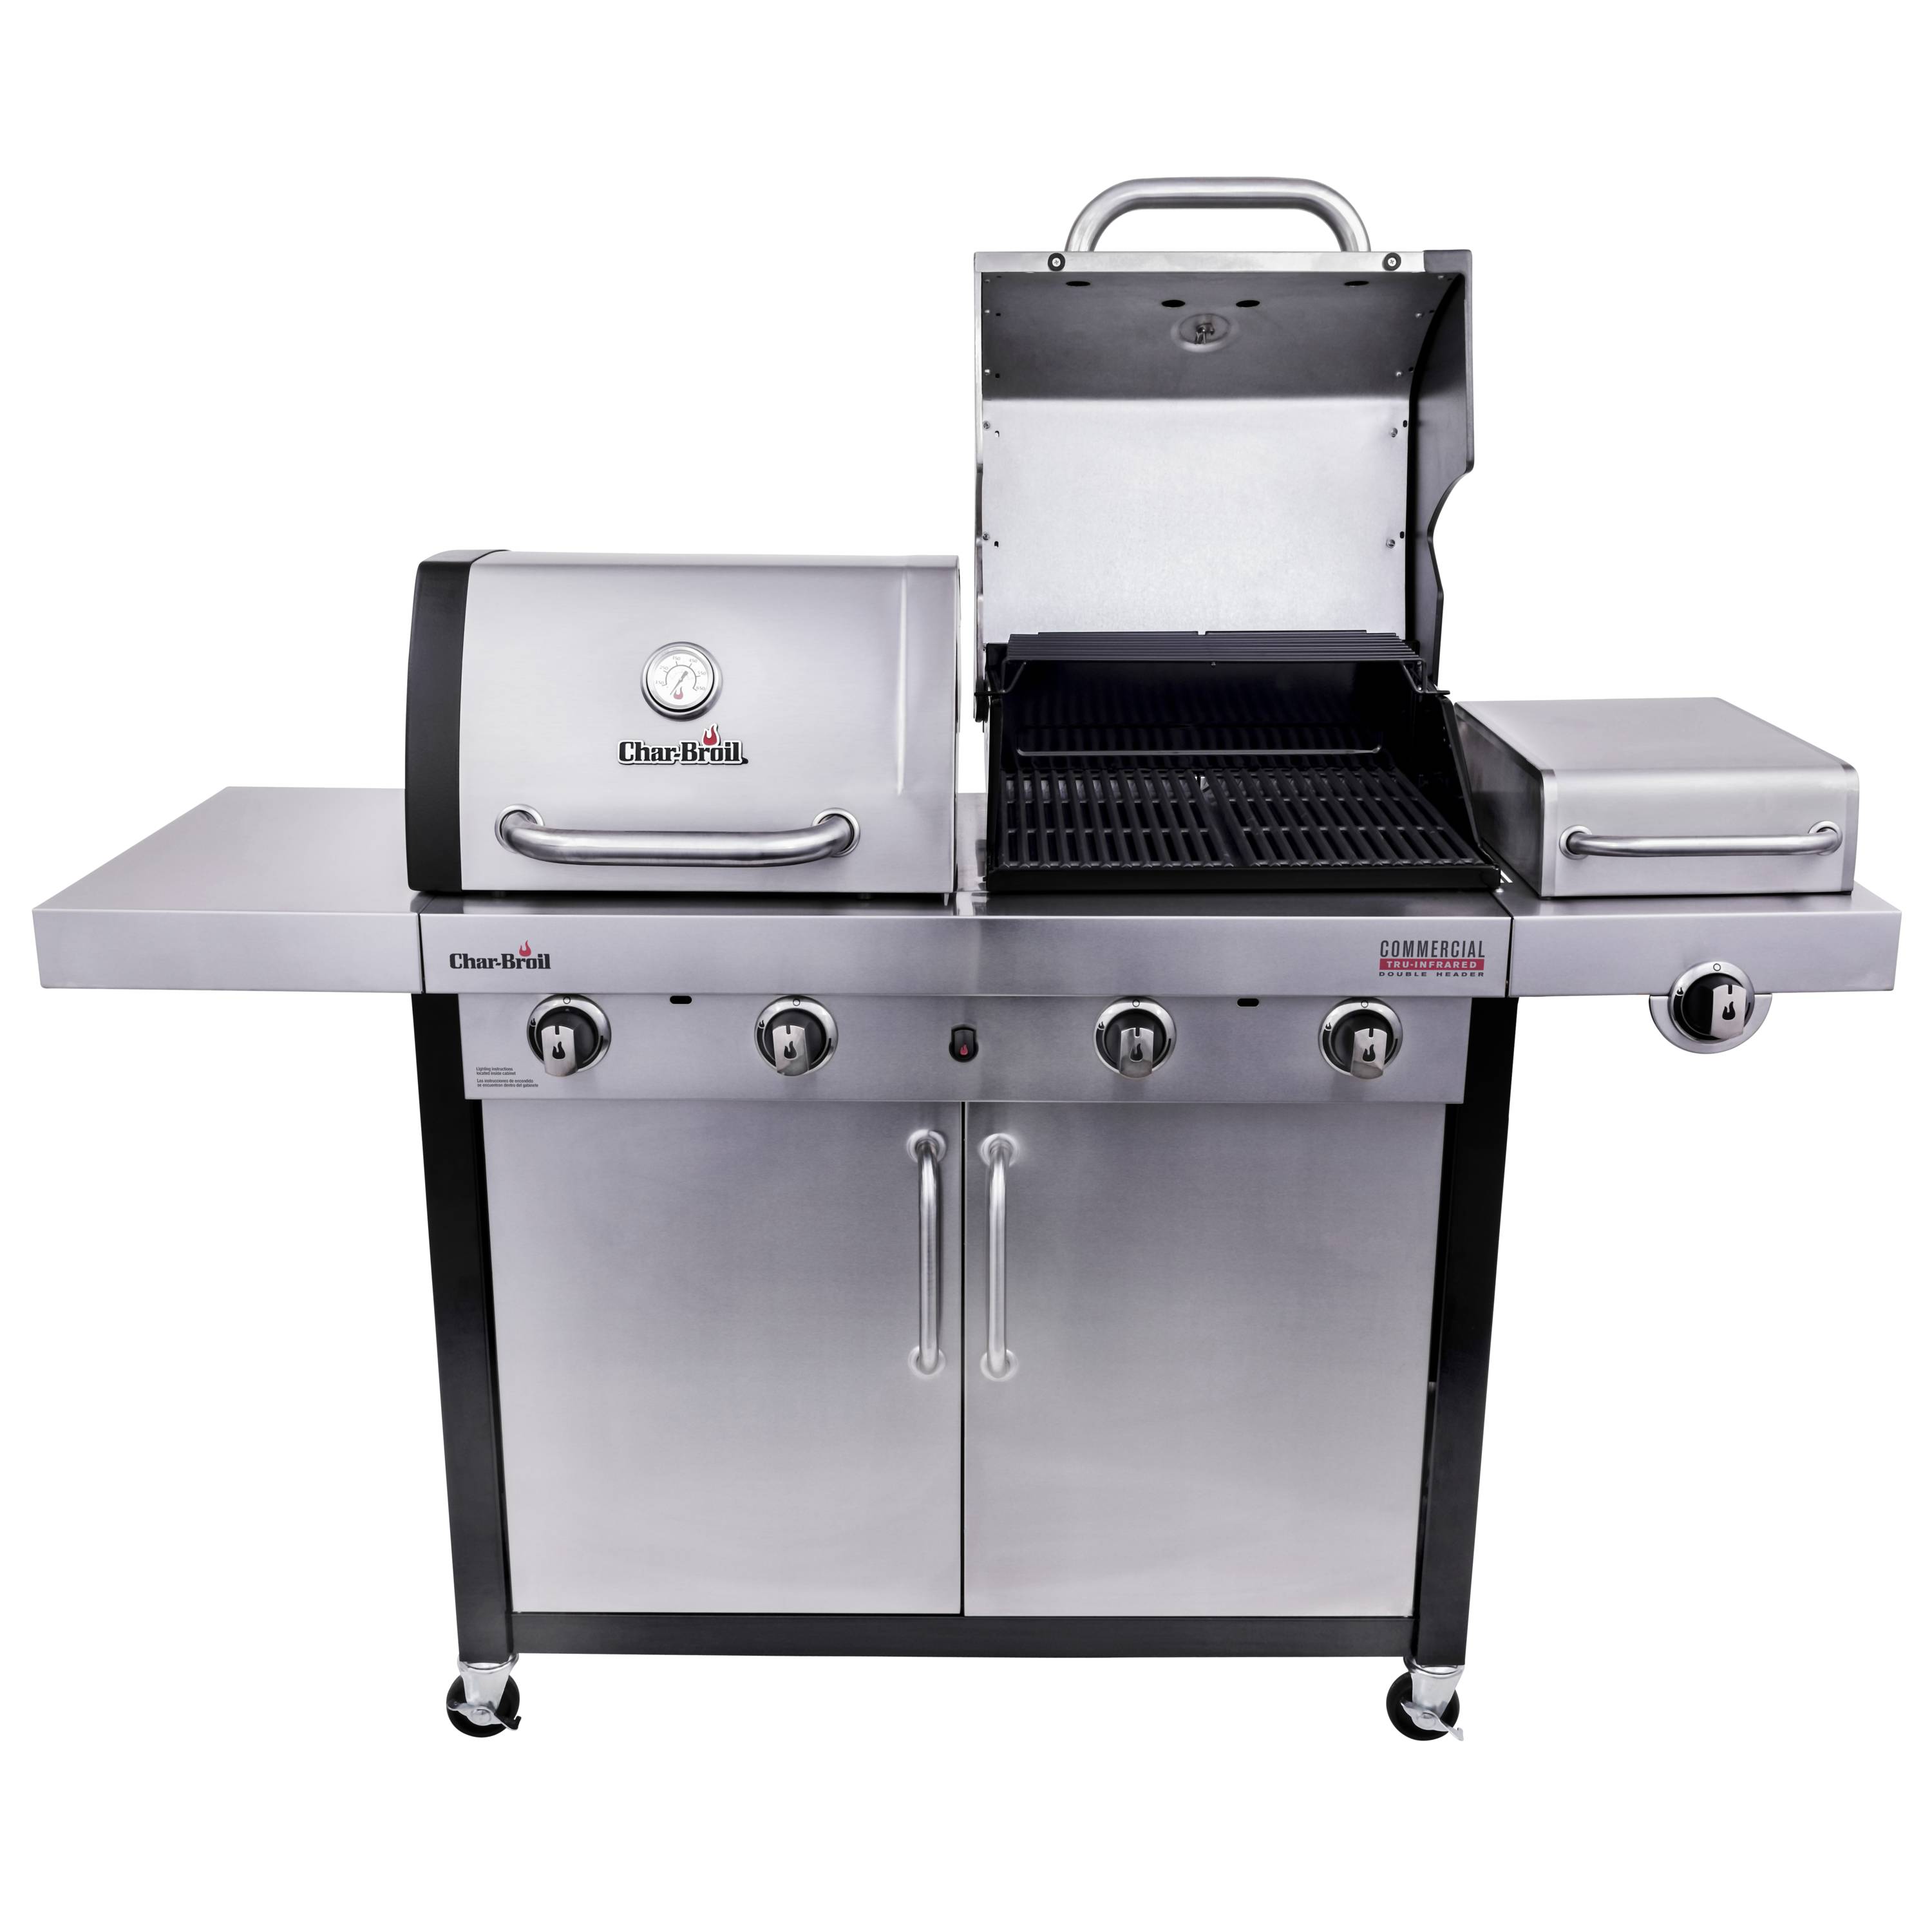 Char-Broil Commercial Series Stainless/Black 4-Burner Liquid and Natural Gas Infrared Gas Grill with 1 Side Burner at Lowes.com